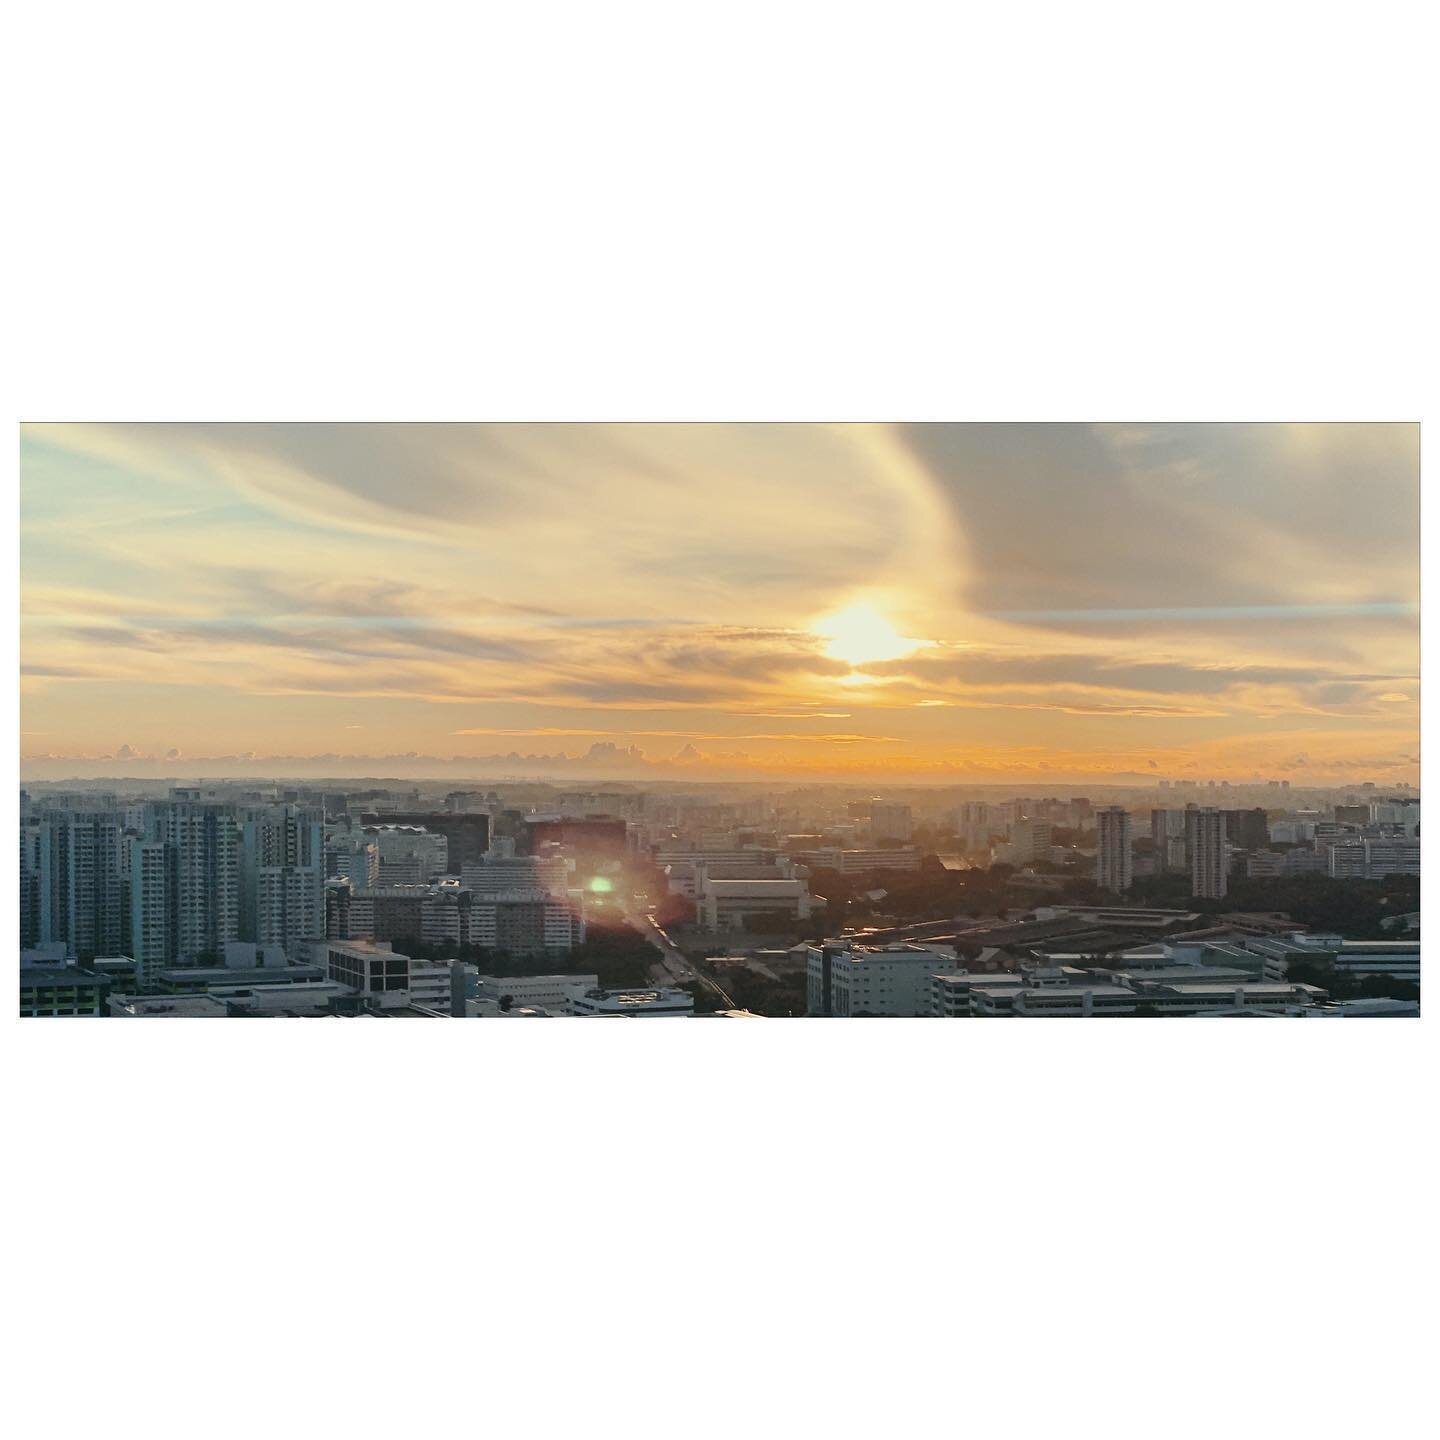 Haven't woken up early enough to see the sunrise in a while.
&bull;
&bull;
&bull;
&bull;
&bull;
#momentlens #shotonmoment #shotoniphone #moment #photography #vsco #mobilephotography #iphonephotography #momentcamera #beautiful #explore #anamorphic #ci